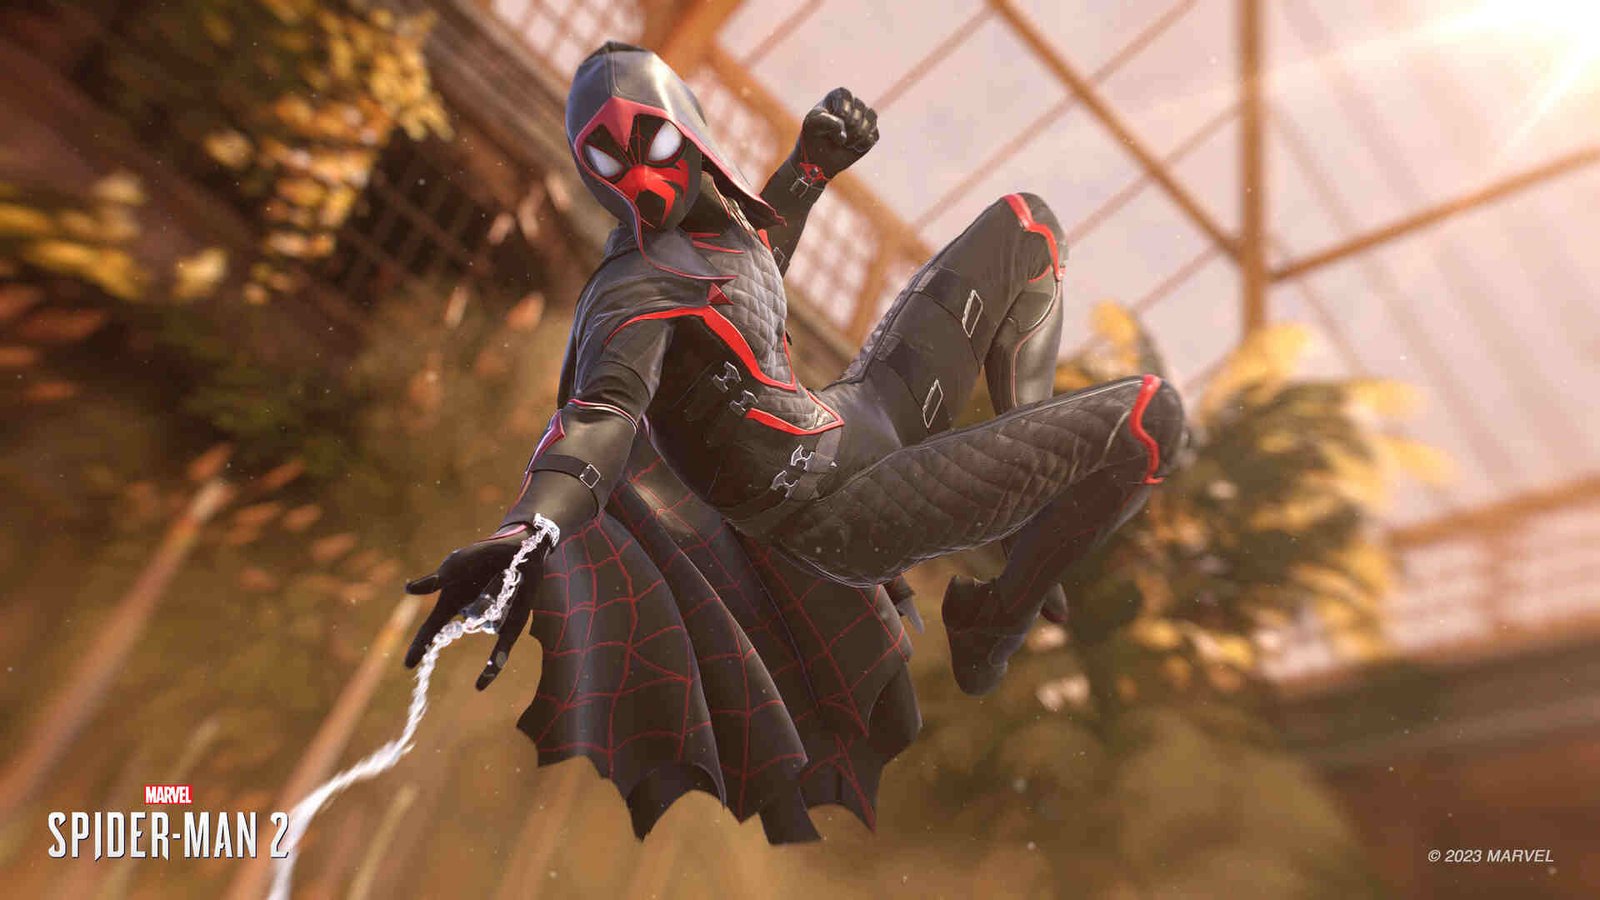 Marvel's Spider-Man 2 Scream Boss Fight Guide: How to beat